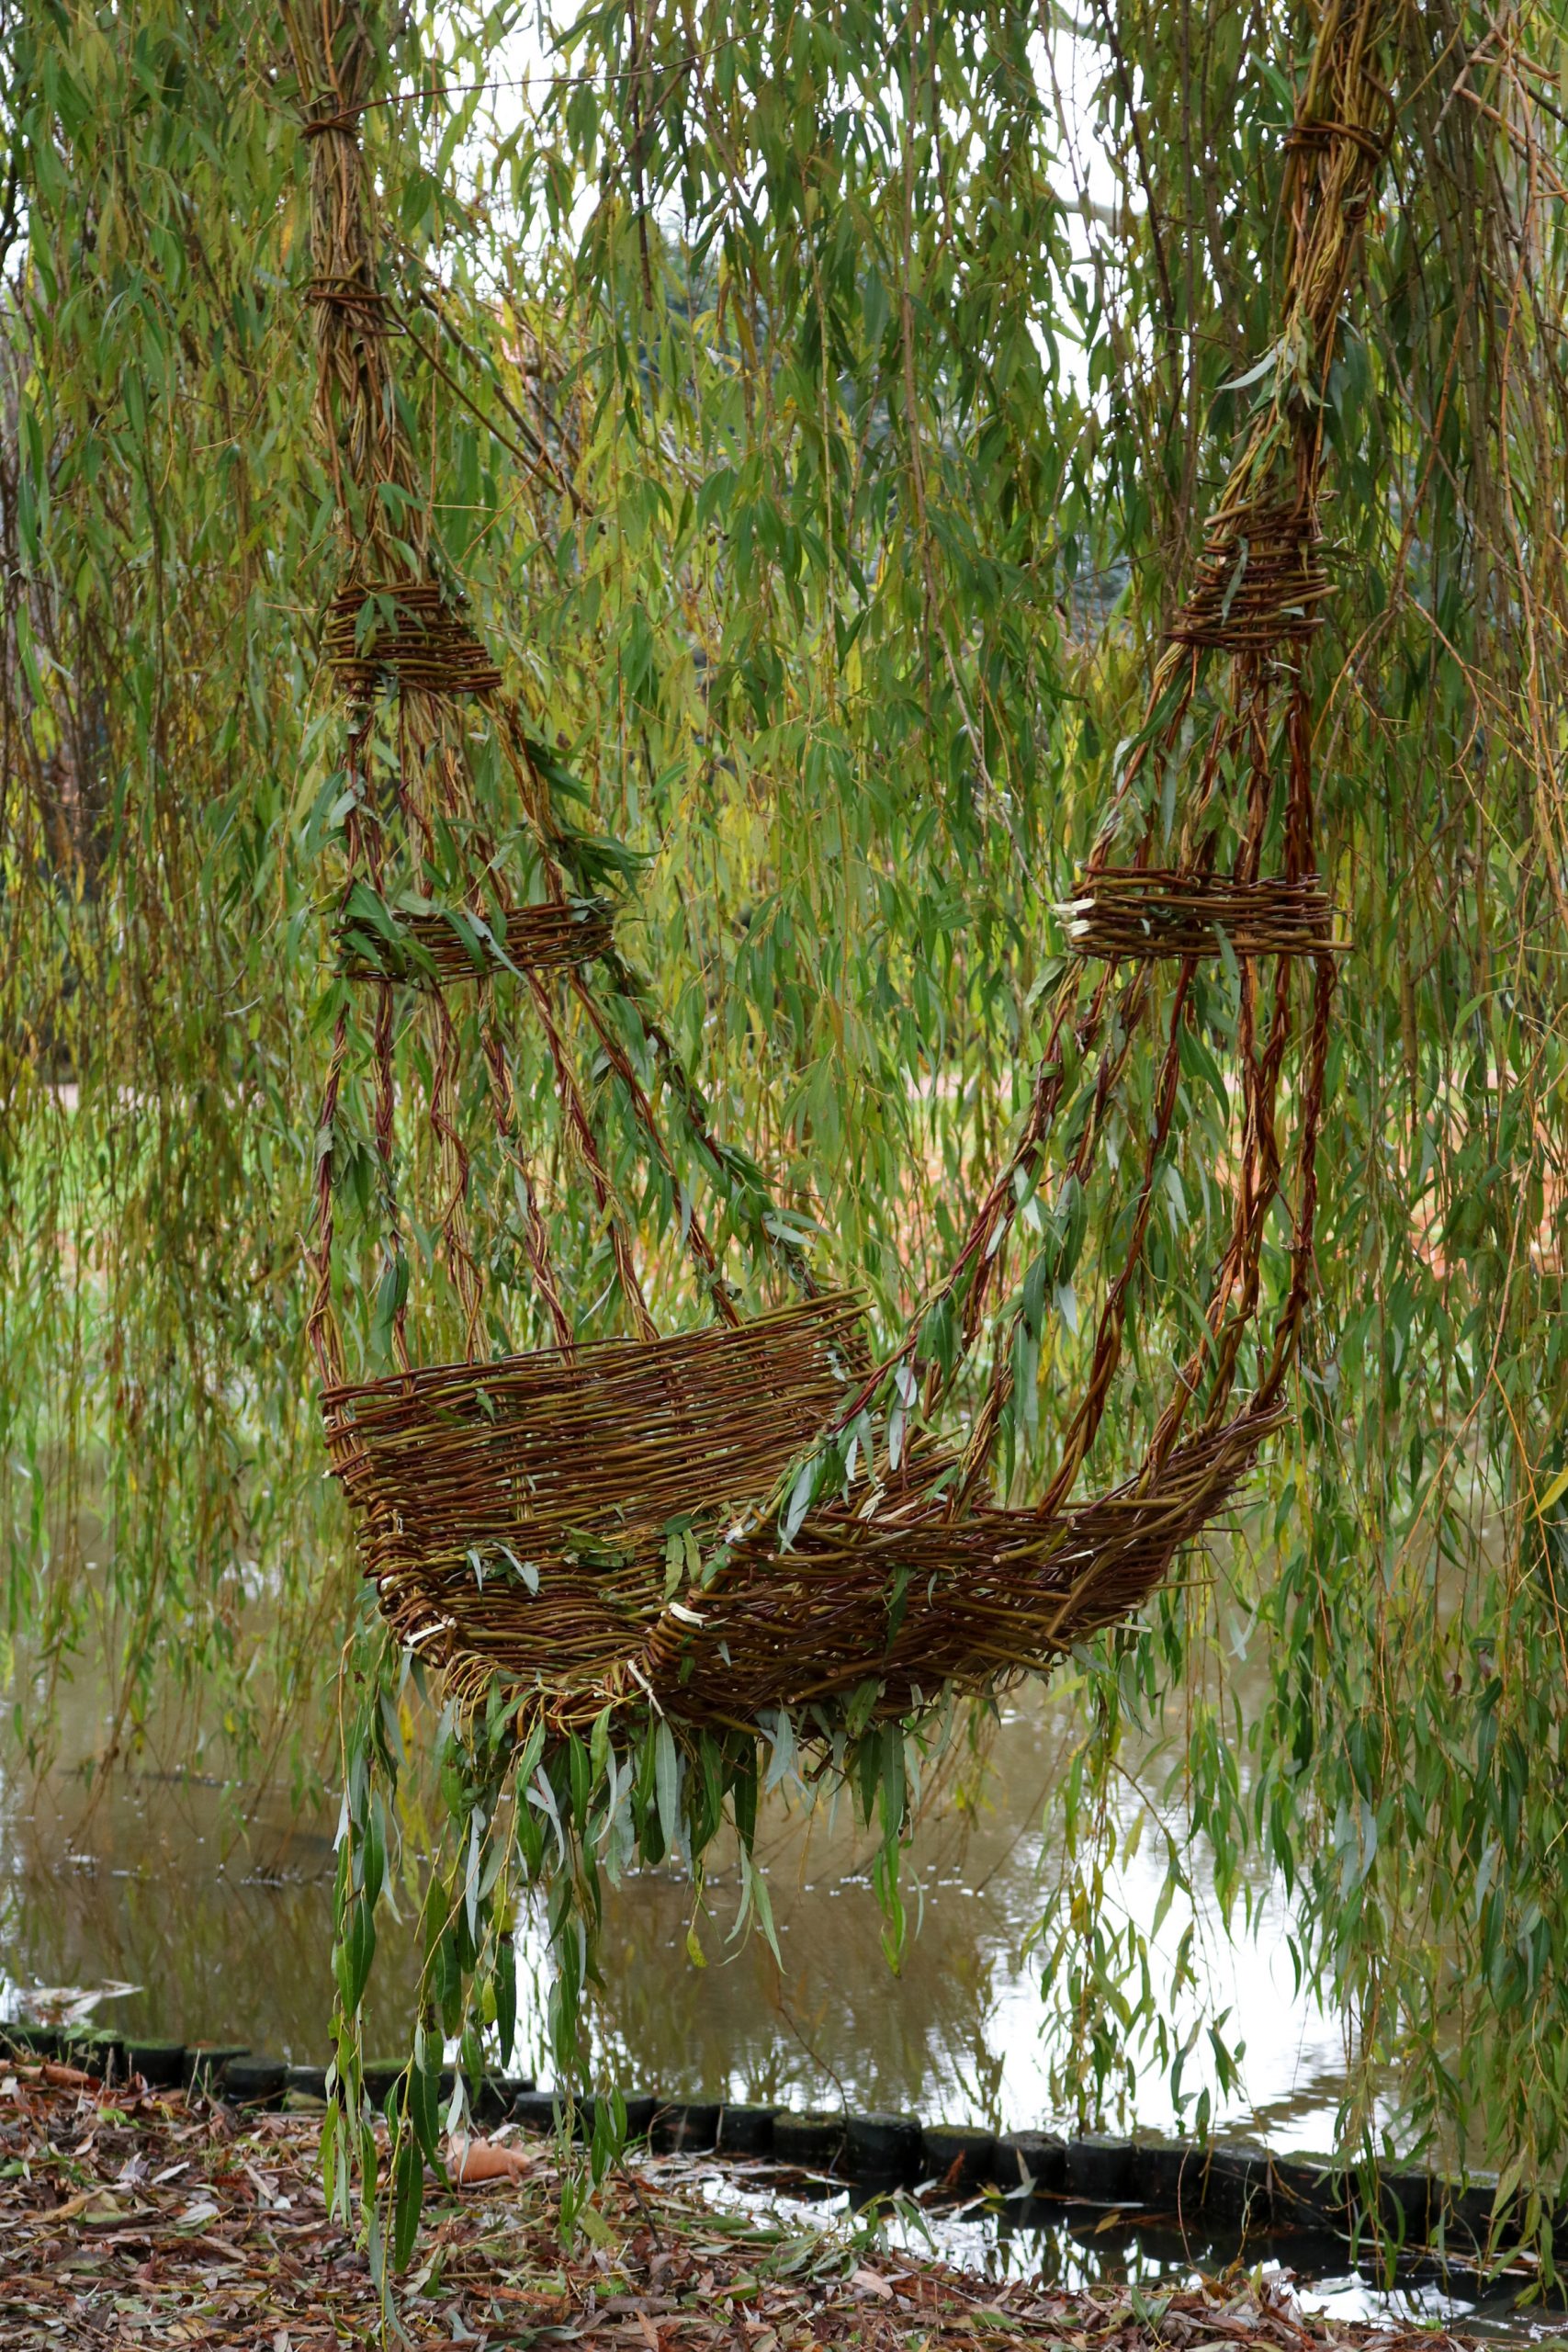 The swing sits on the Dommel river in Eindhoven